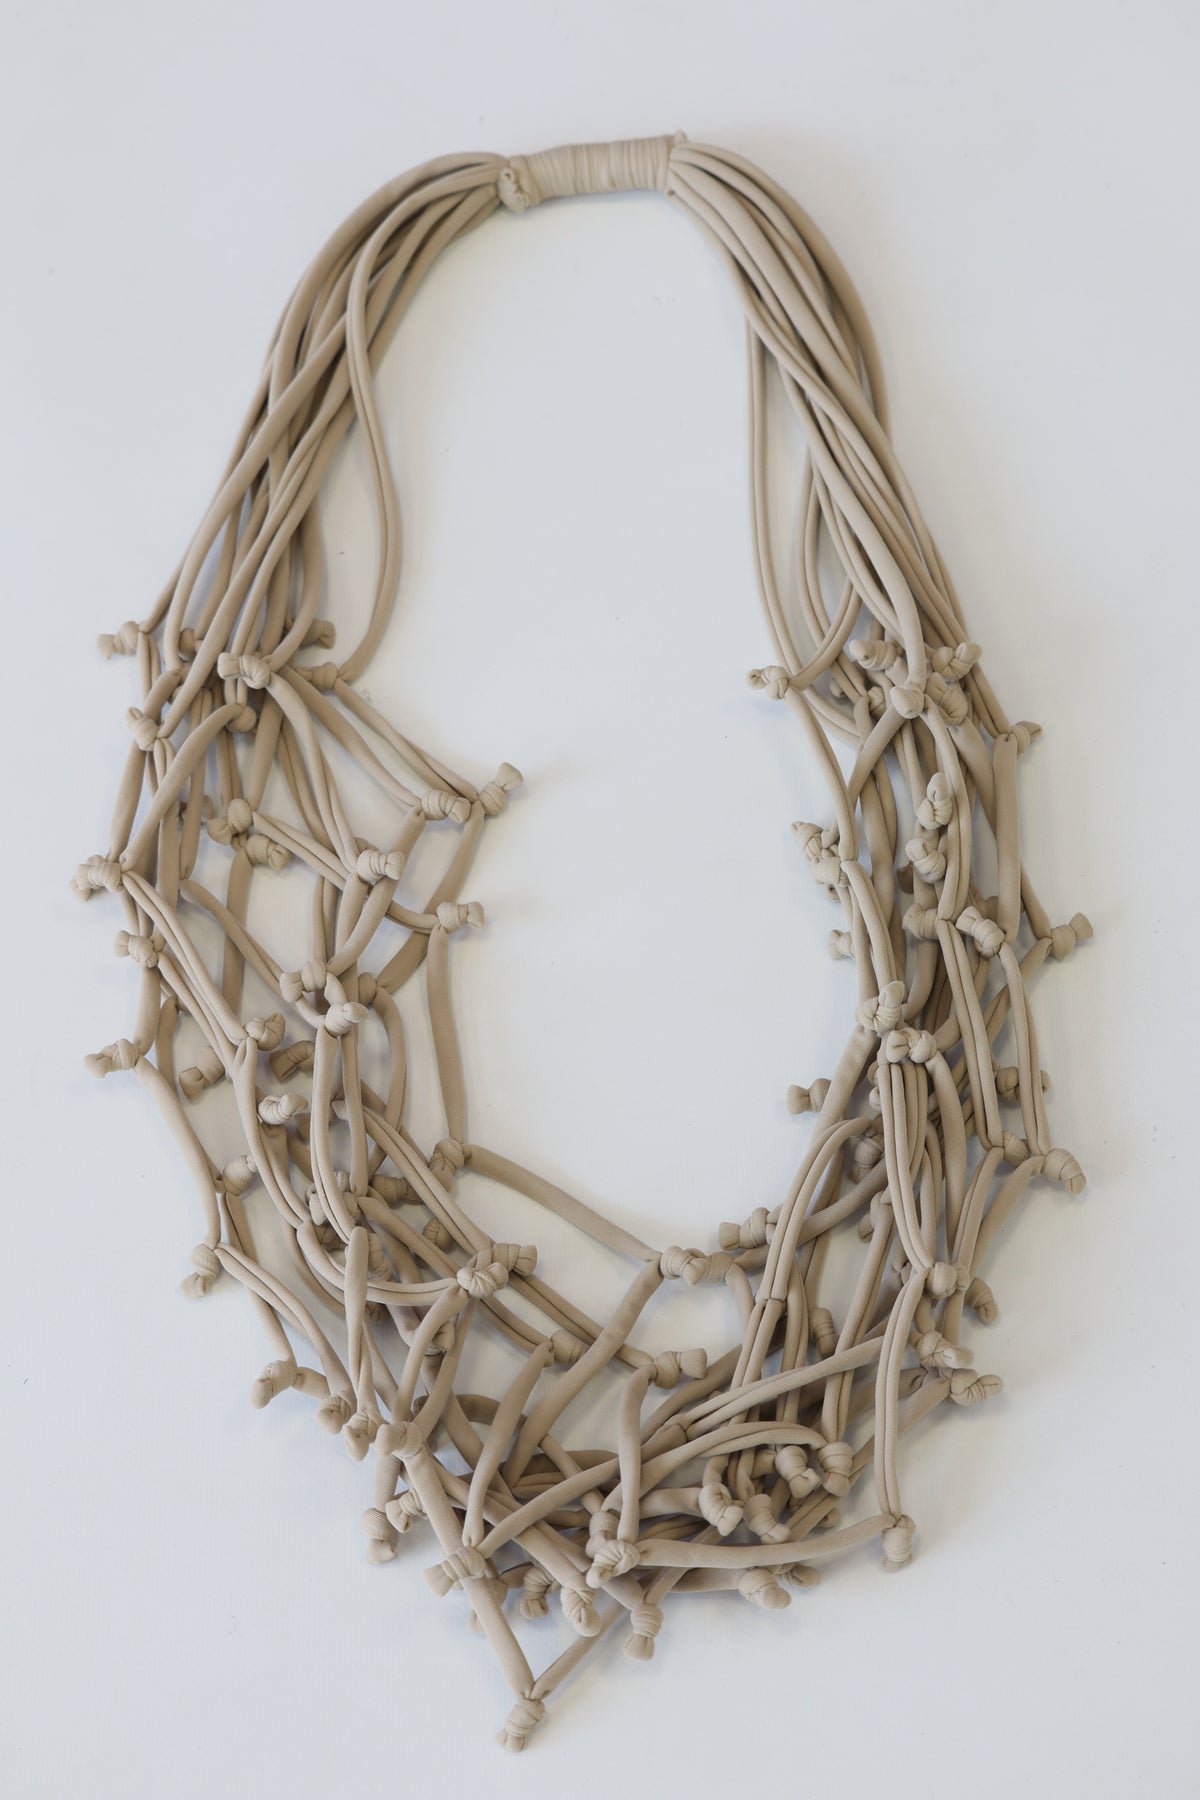 Kya Tan Knotted Necklace